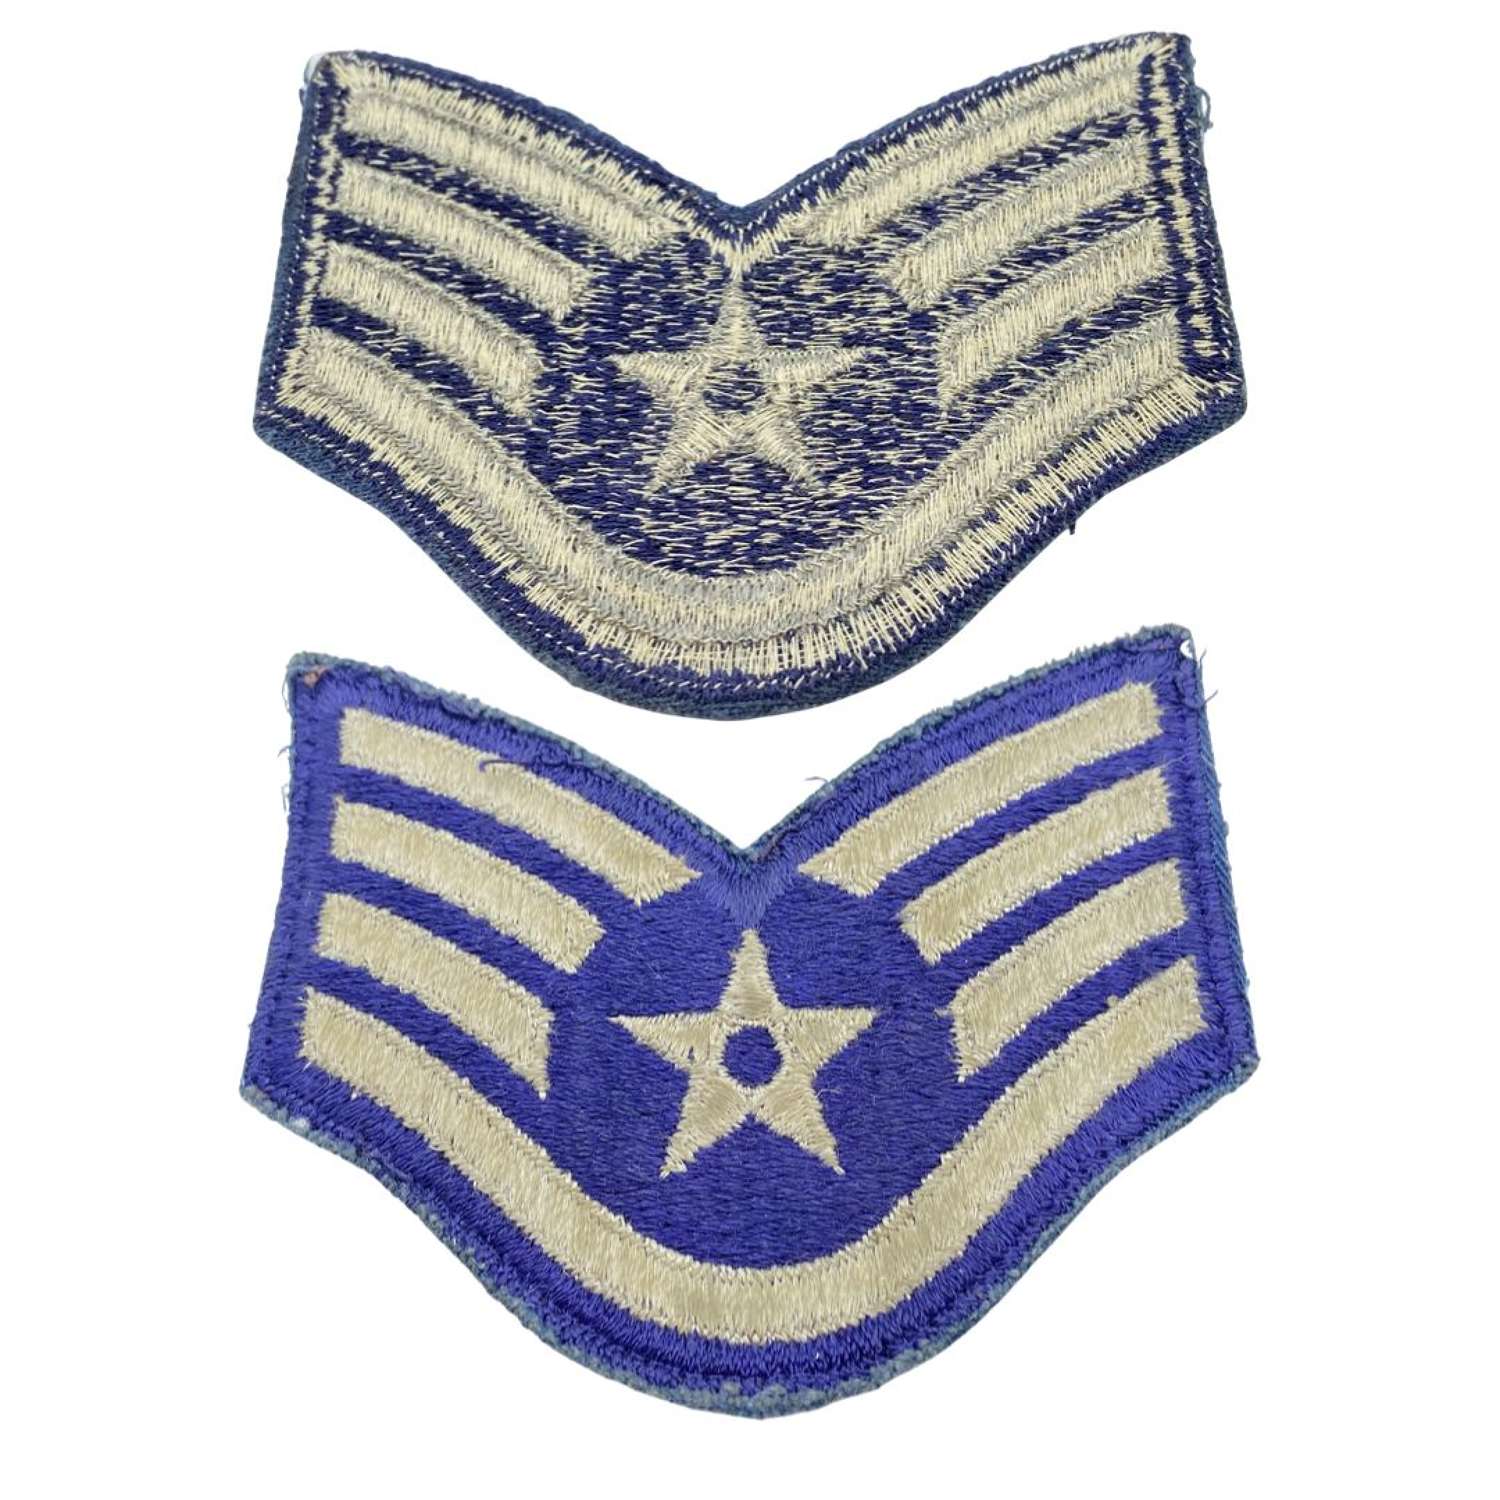 Post WW2 1976-93 USAF Air Force Rank Patch Staff Sergeant E-5 Patch